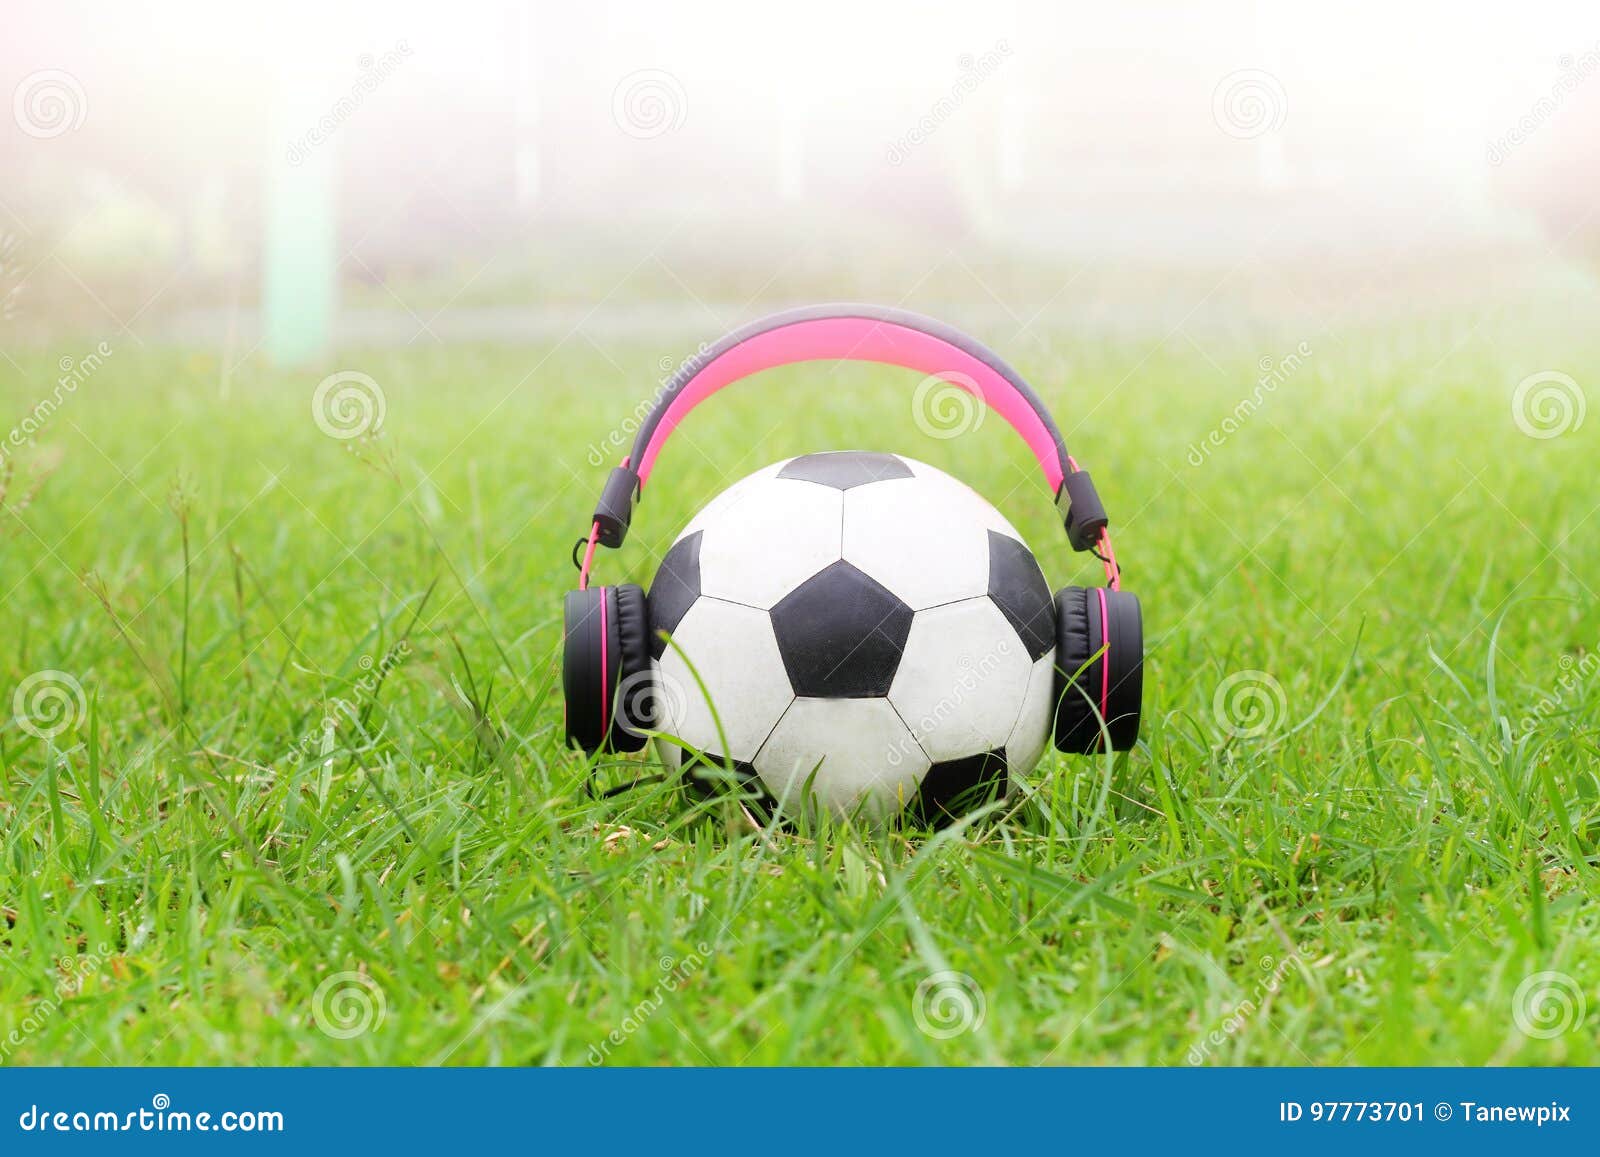 Funny Football Music on Green Grass and Light Background Stock Image -  Image of instrument, festival: 97773701